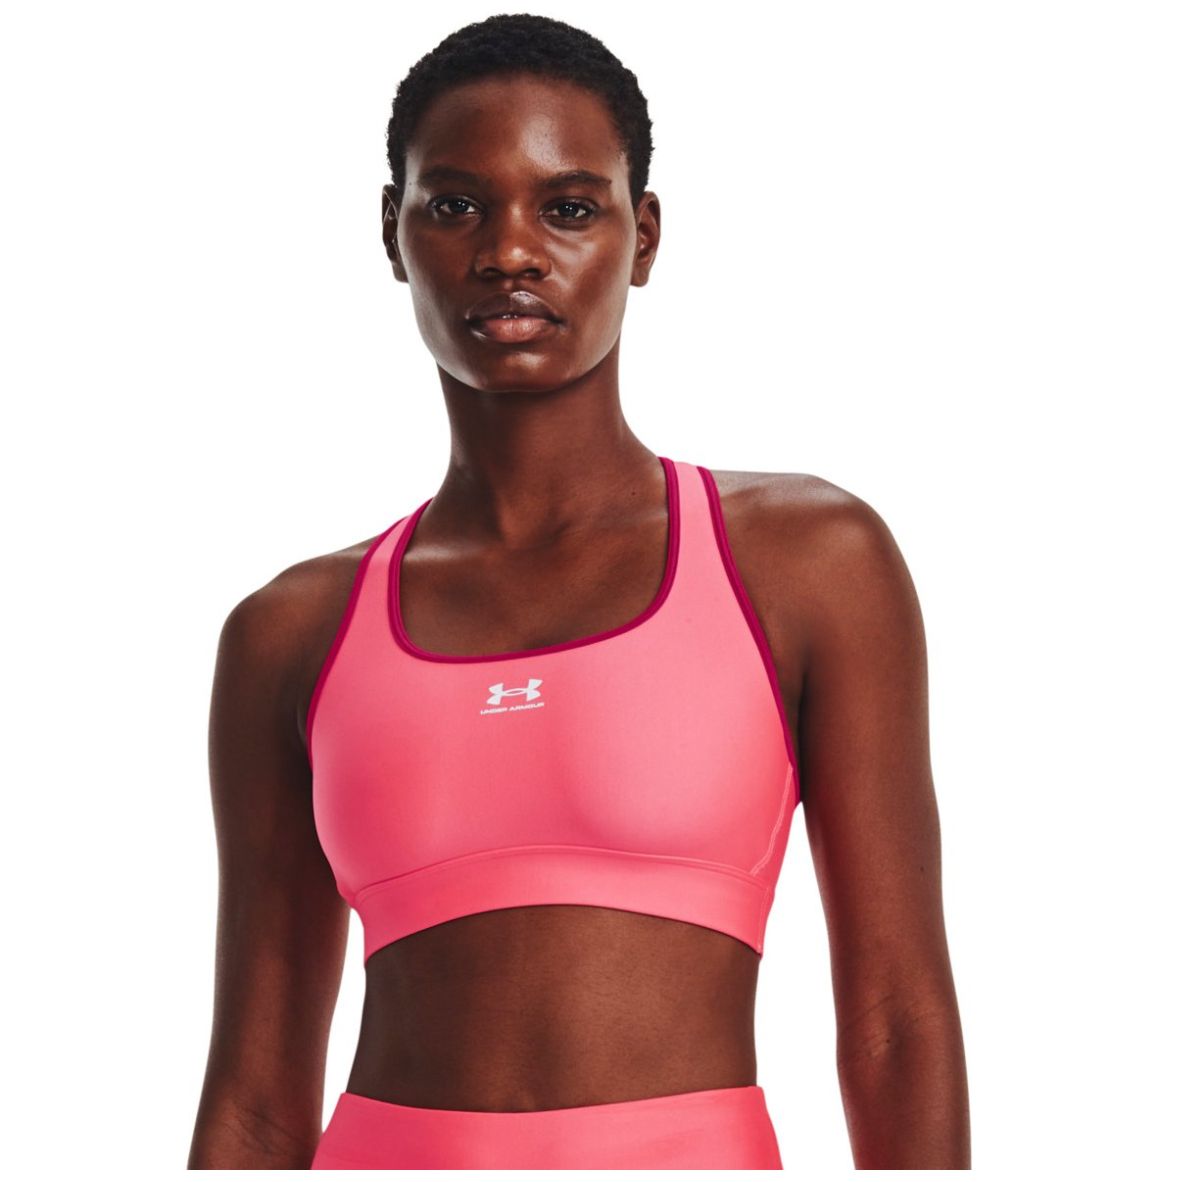 Top Entrenamiento Under Armour Infinity High Heather Mujer